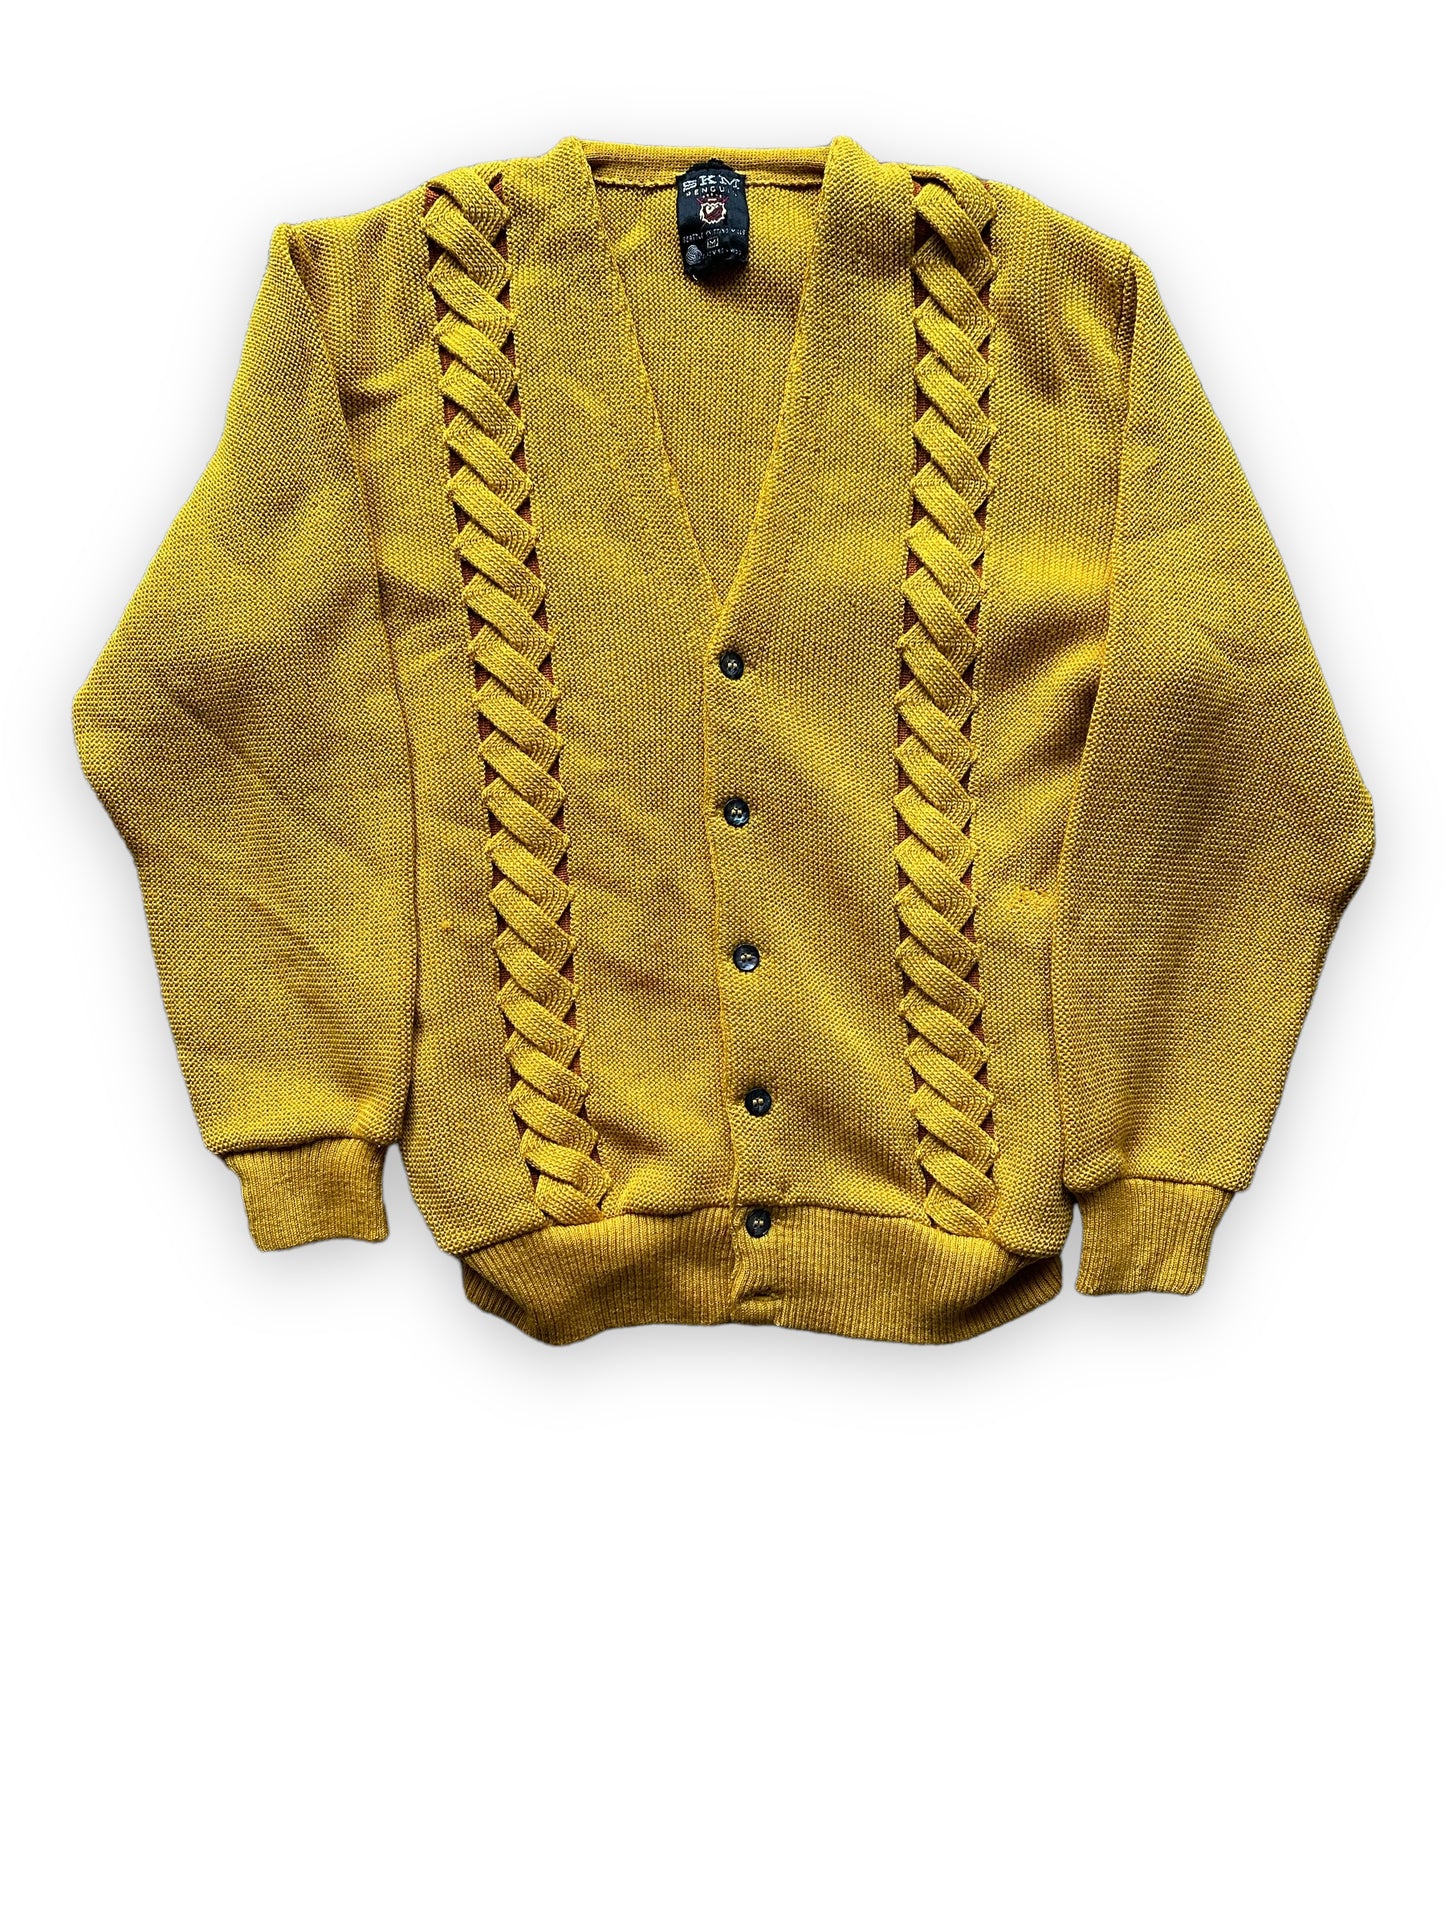 Front Flat View of Vintage Seattle Knitting Mills Golden Double Helix Wool Sweater SZ M |  Vintage Cardigan Sweaters Seattle | Barn Owl Vintage Seattle